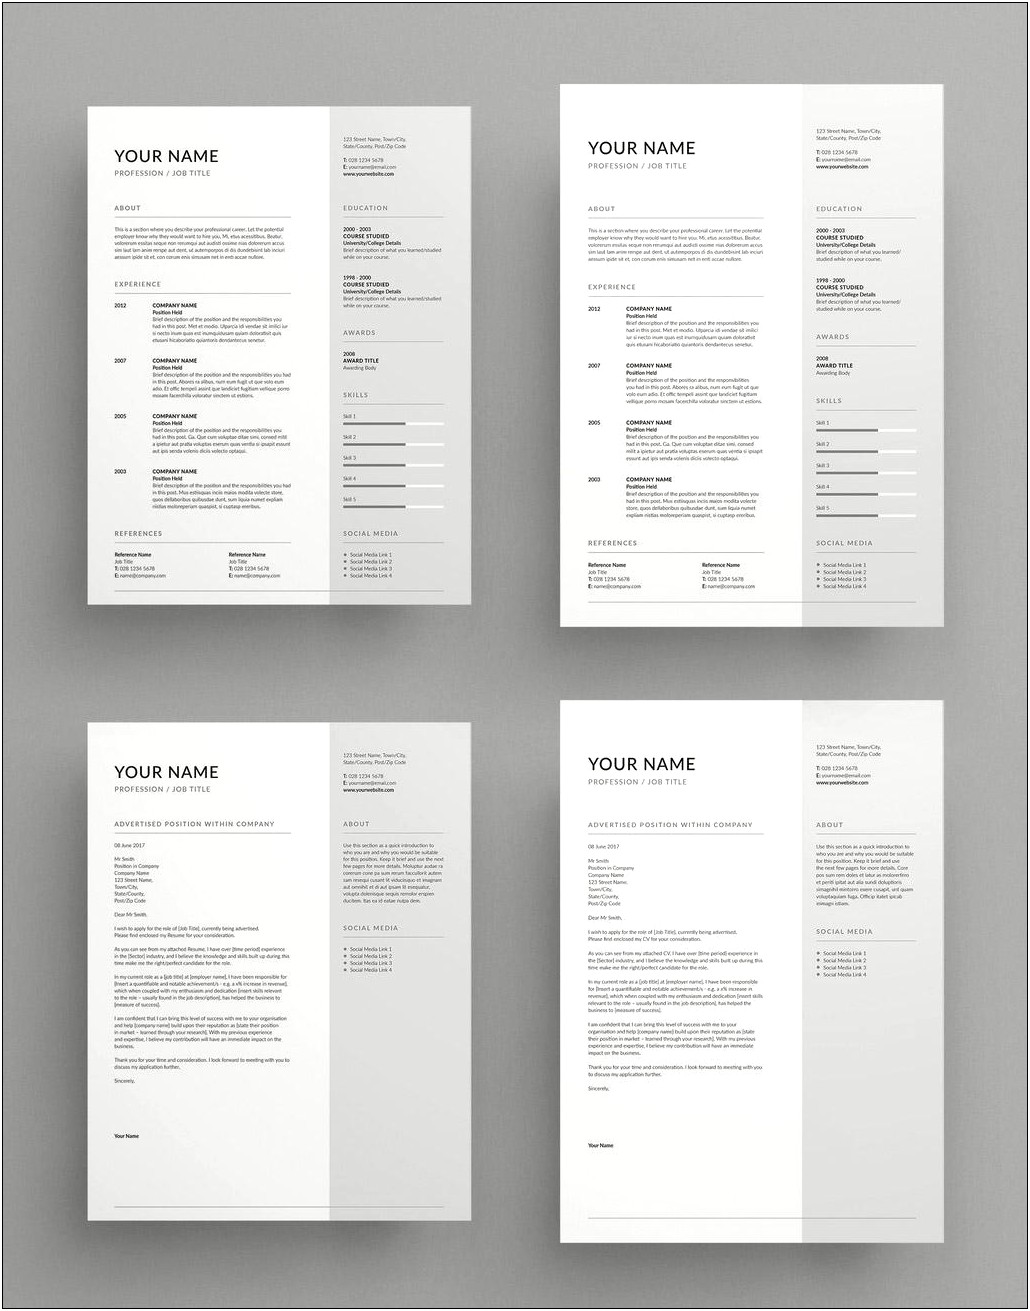 Simple Cover Letter For Resume Docs